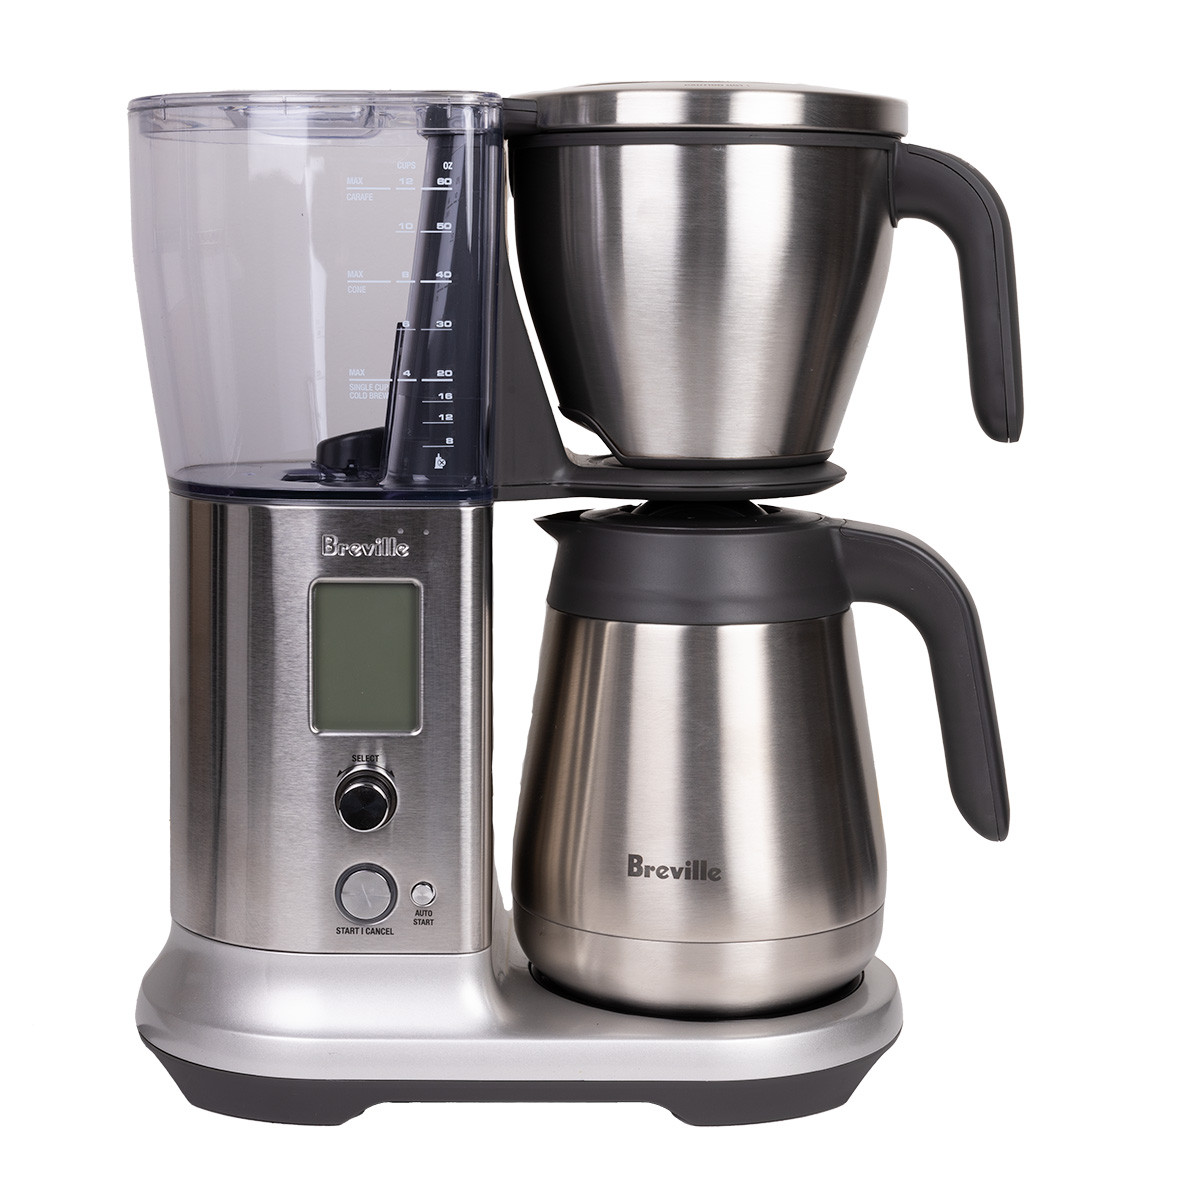 https://cdn11.bigcommerce.com/s-6h7ychjk4/products/11312/images/95548/Breville-Precision-Brewer-WBG-1__08150.1697731559.1280.1280.jpg?c=1